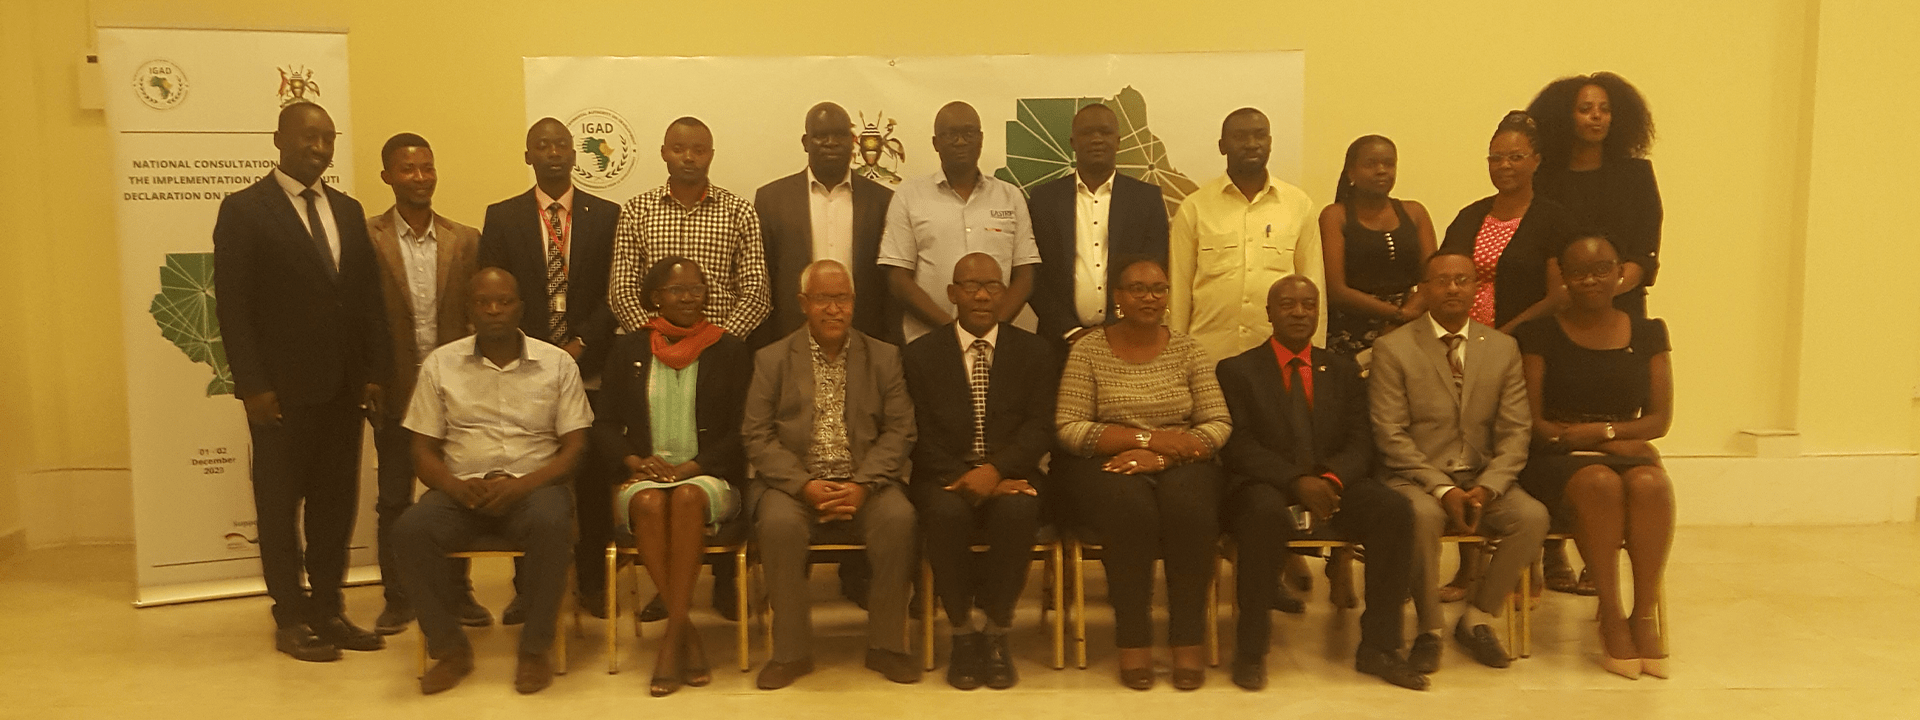 IGAD holds the Uganda National Consultation Meeting on the Implementation of the Djibouti Declaration on Education